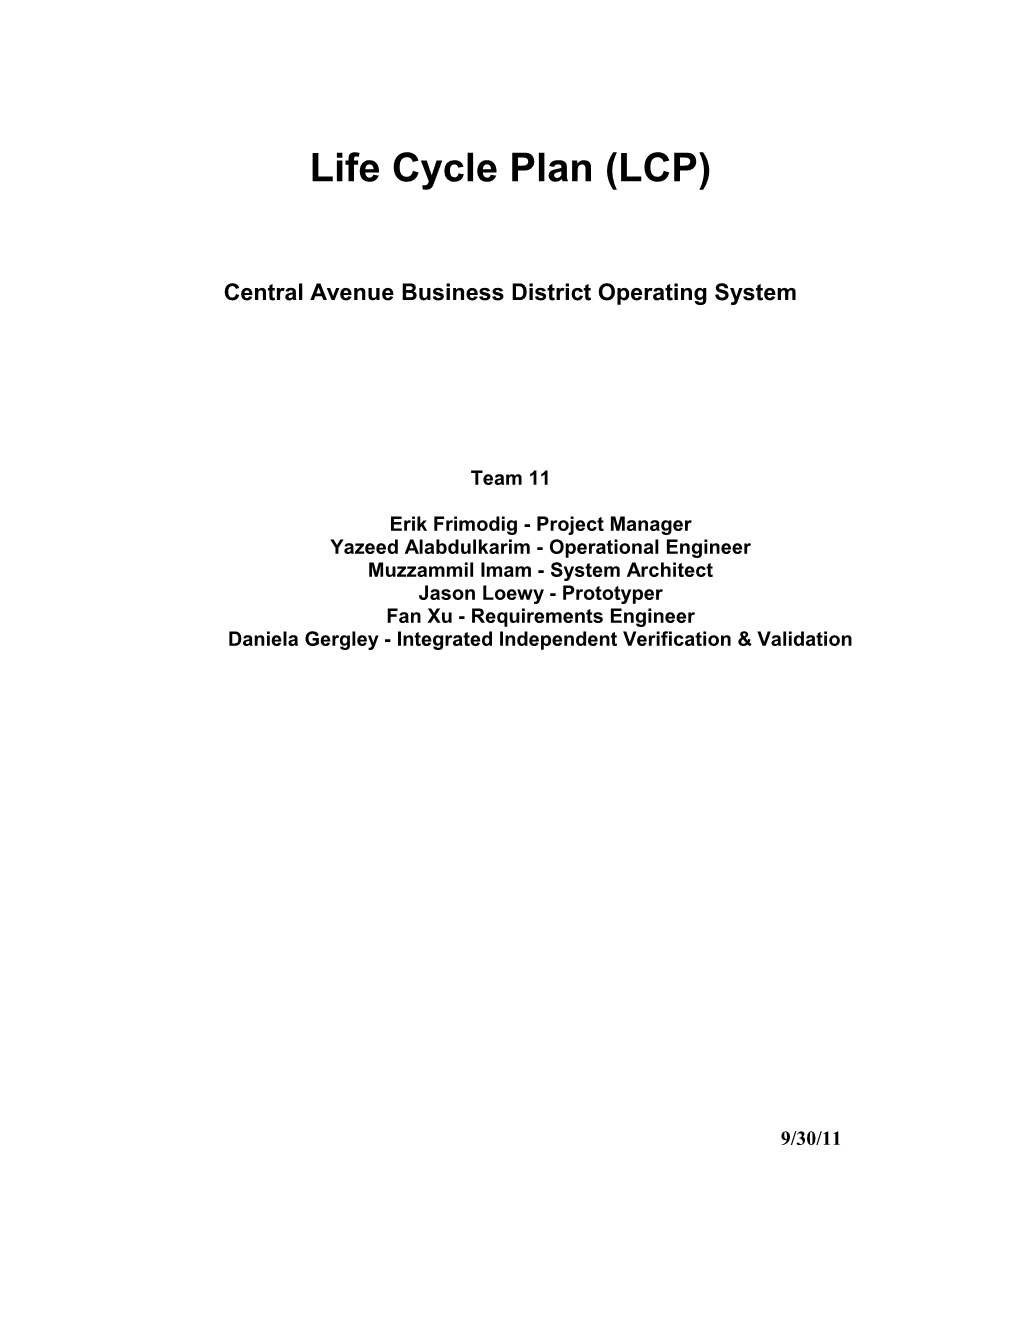 Life Cycle Plan (LCP) s1